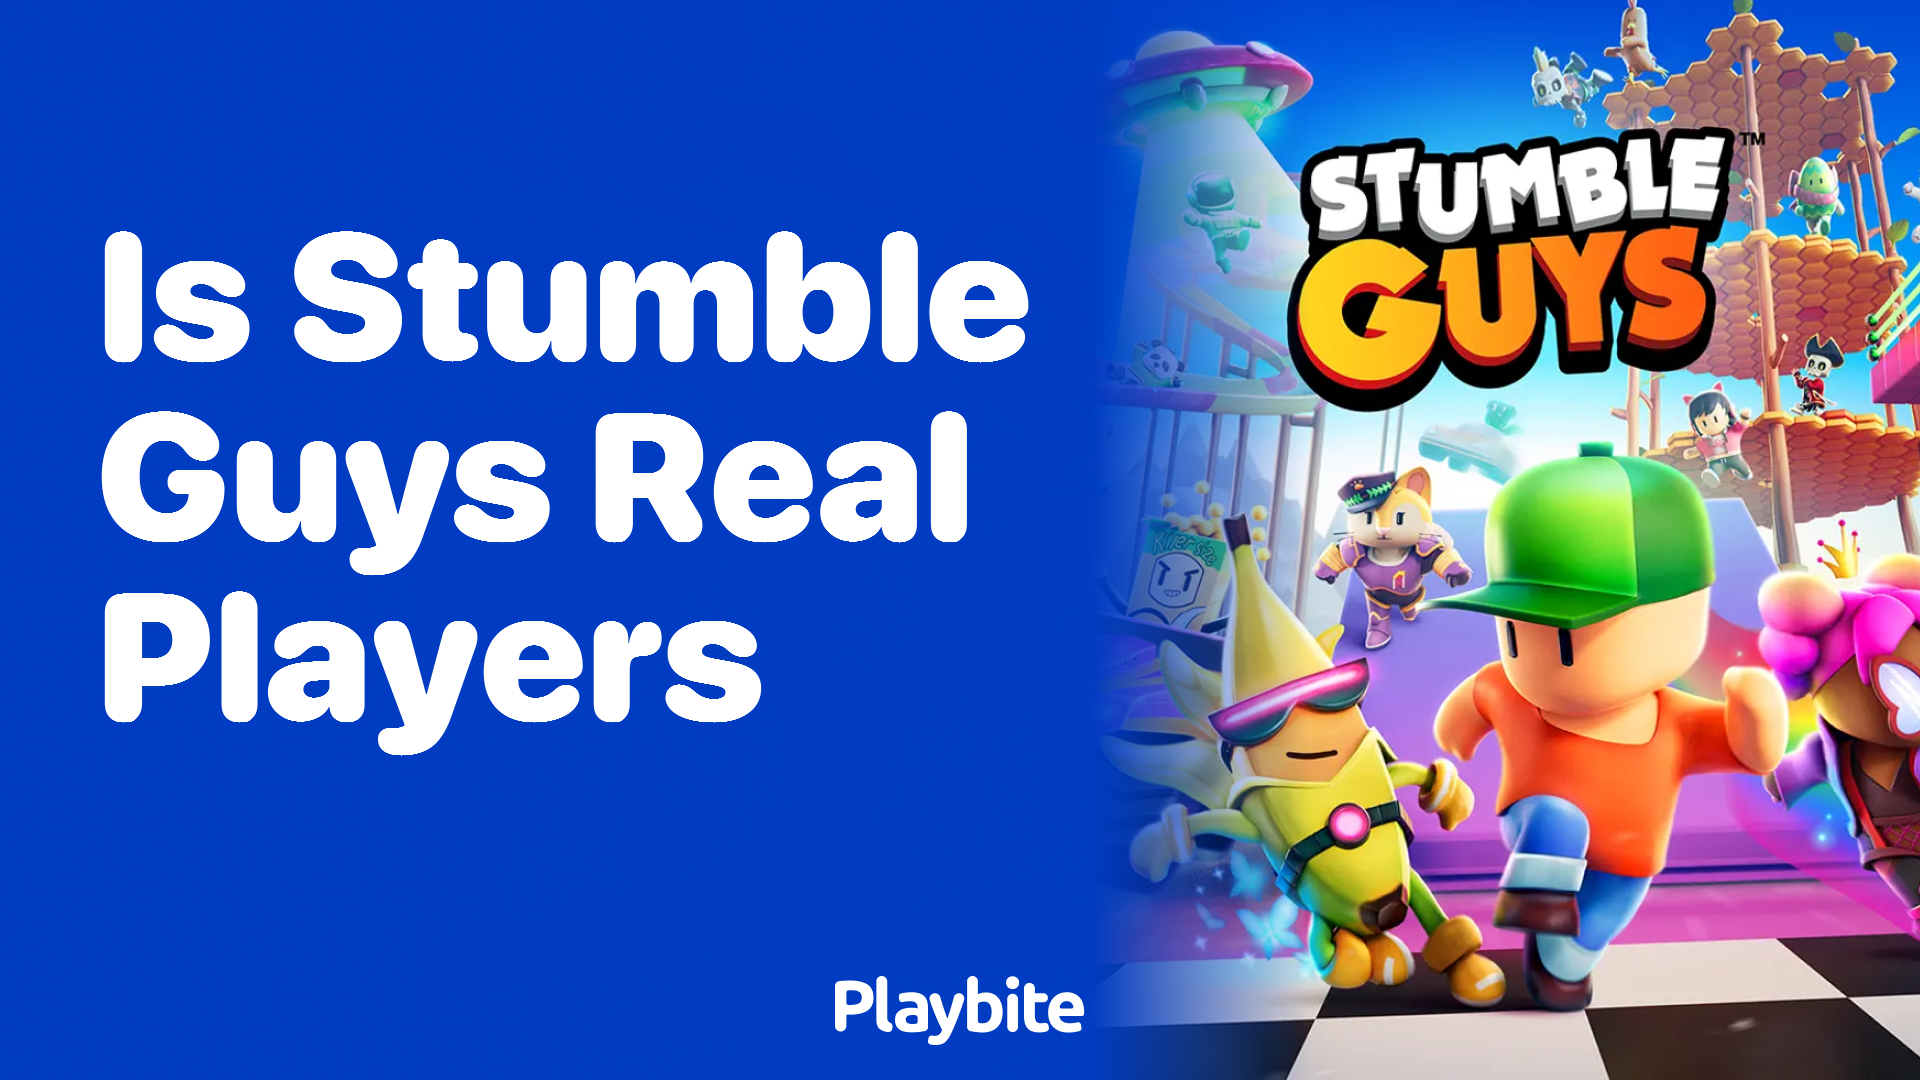 Is Stumble Guys Real Players or Bots?